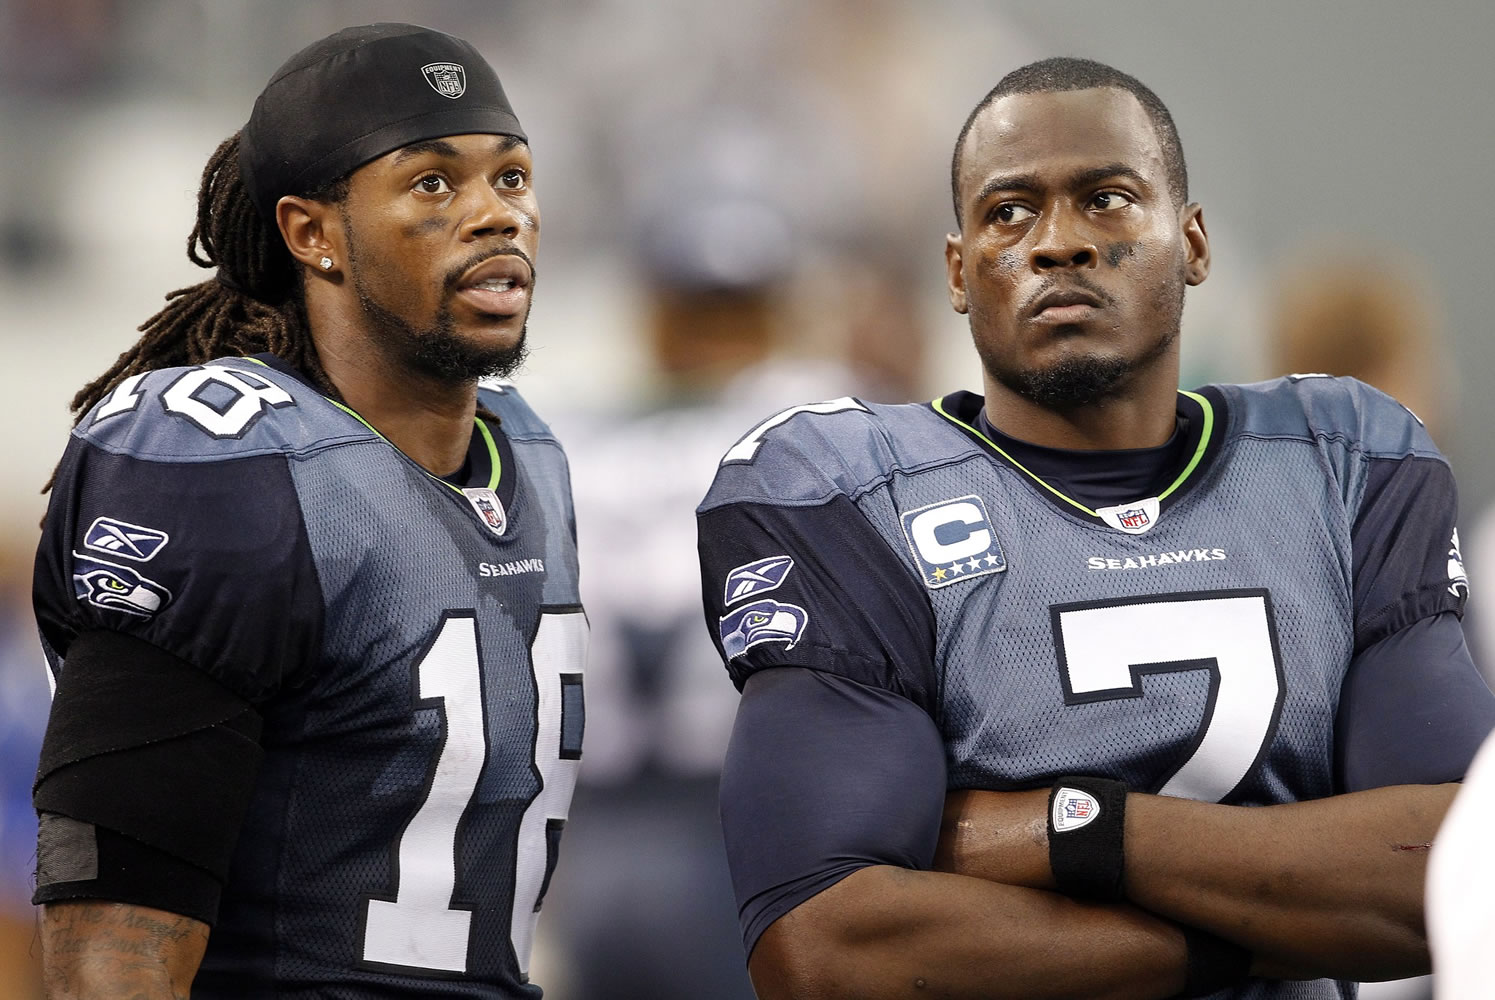 Sidney Rice, left, cited fallout from injuries and concussions in his decision to retire.